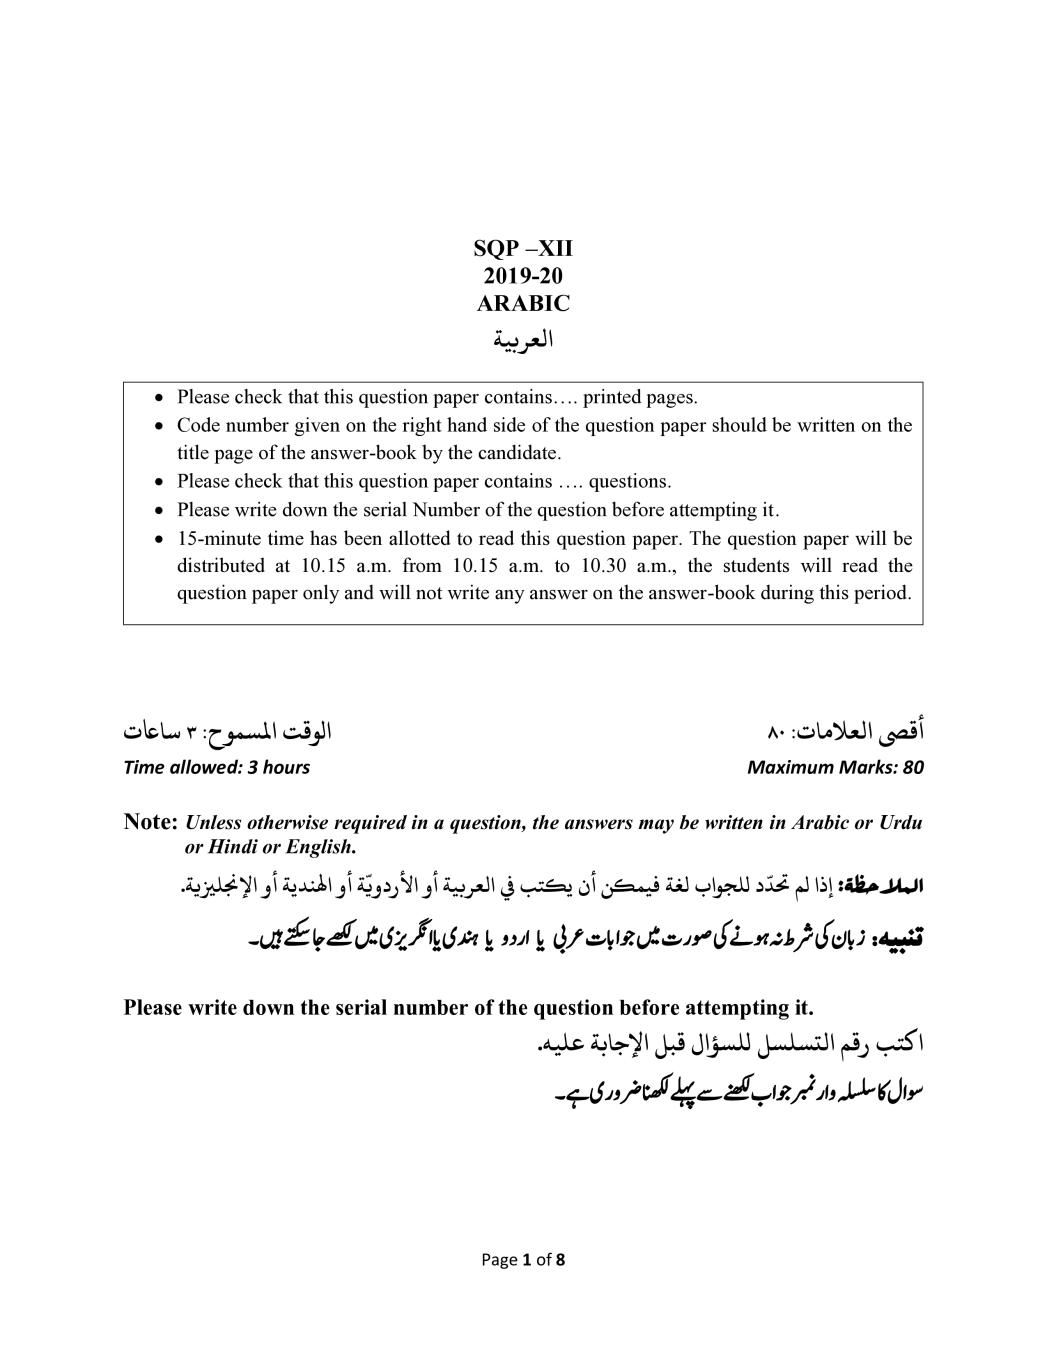 CBSE Class 12 Sample Paper 2020 for Arabic - Page 1